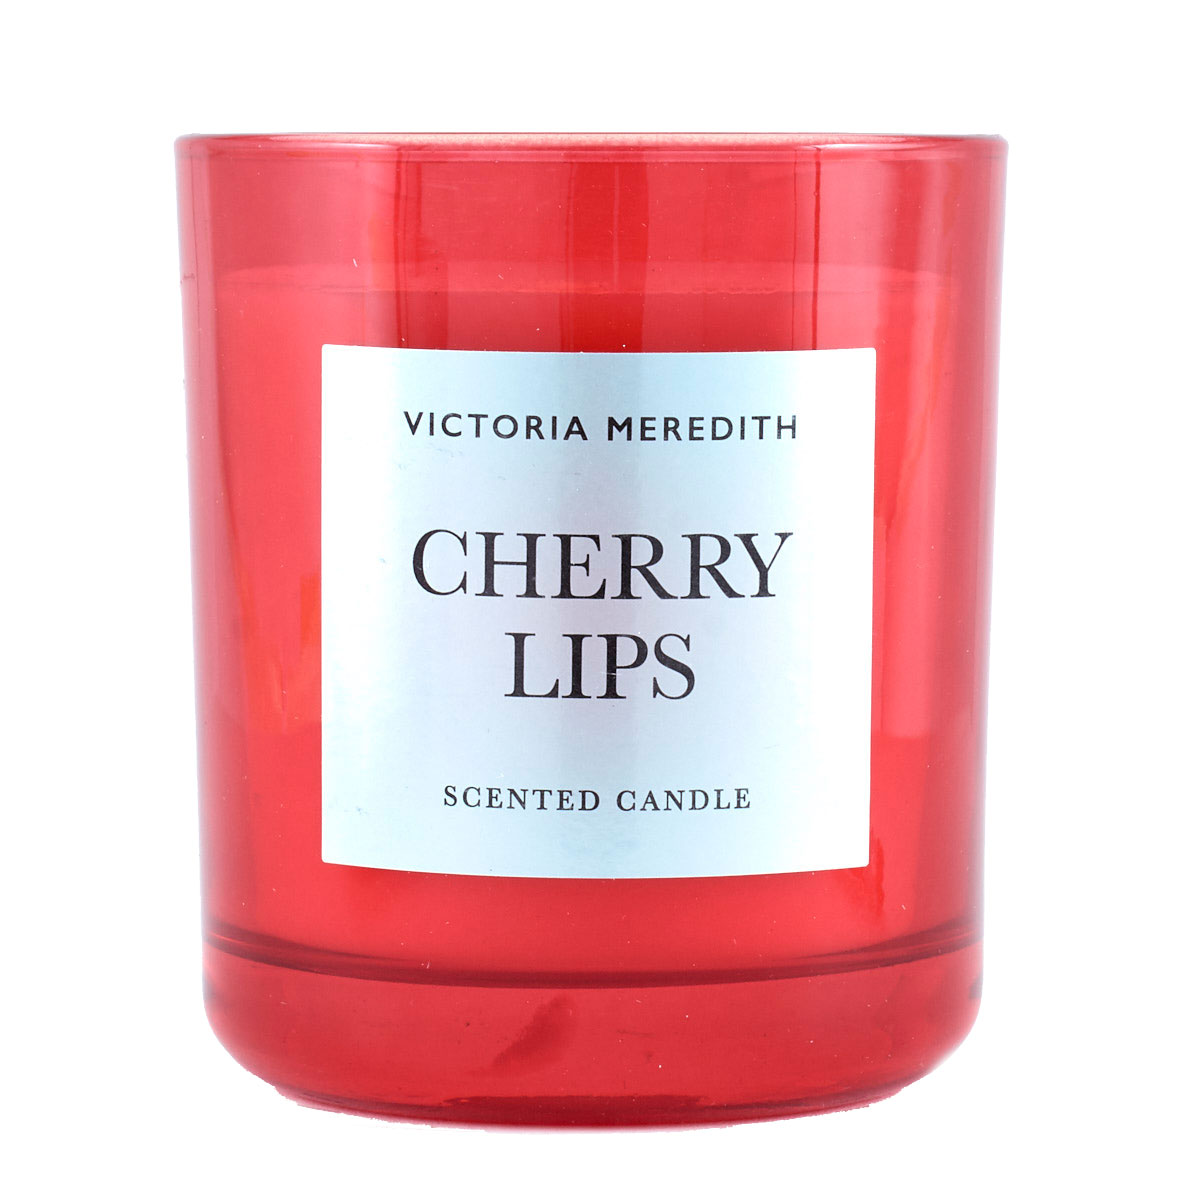 Victoria Meredith Cherry Lips Scented Candle